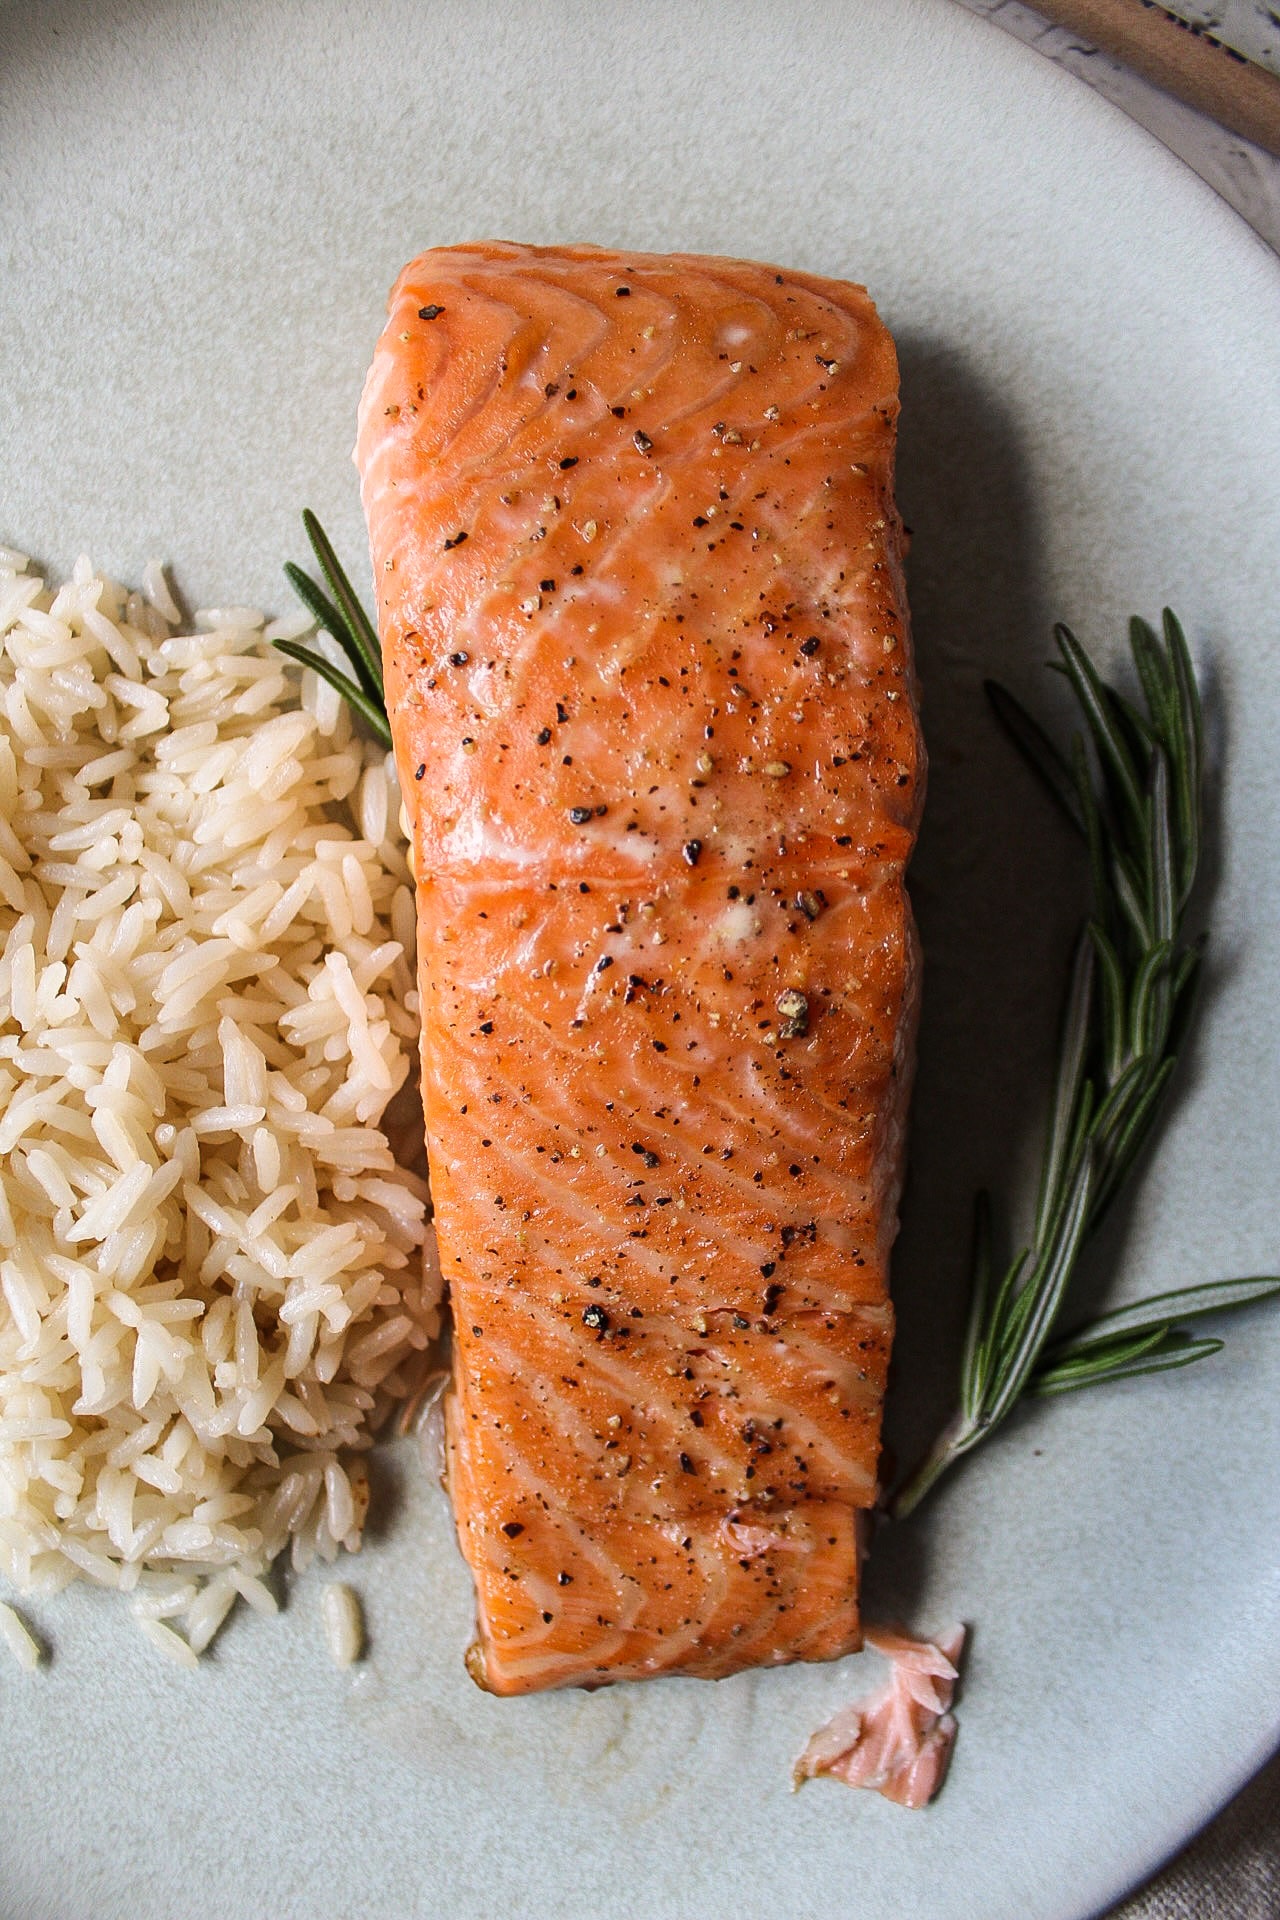 a filet of salmon with rice and rosemary on a plate